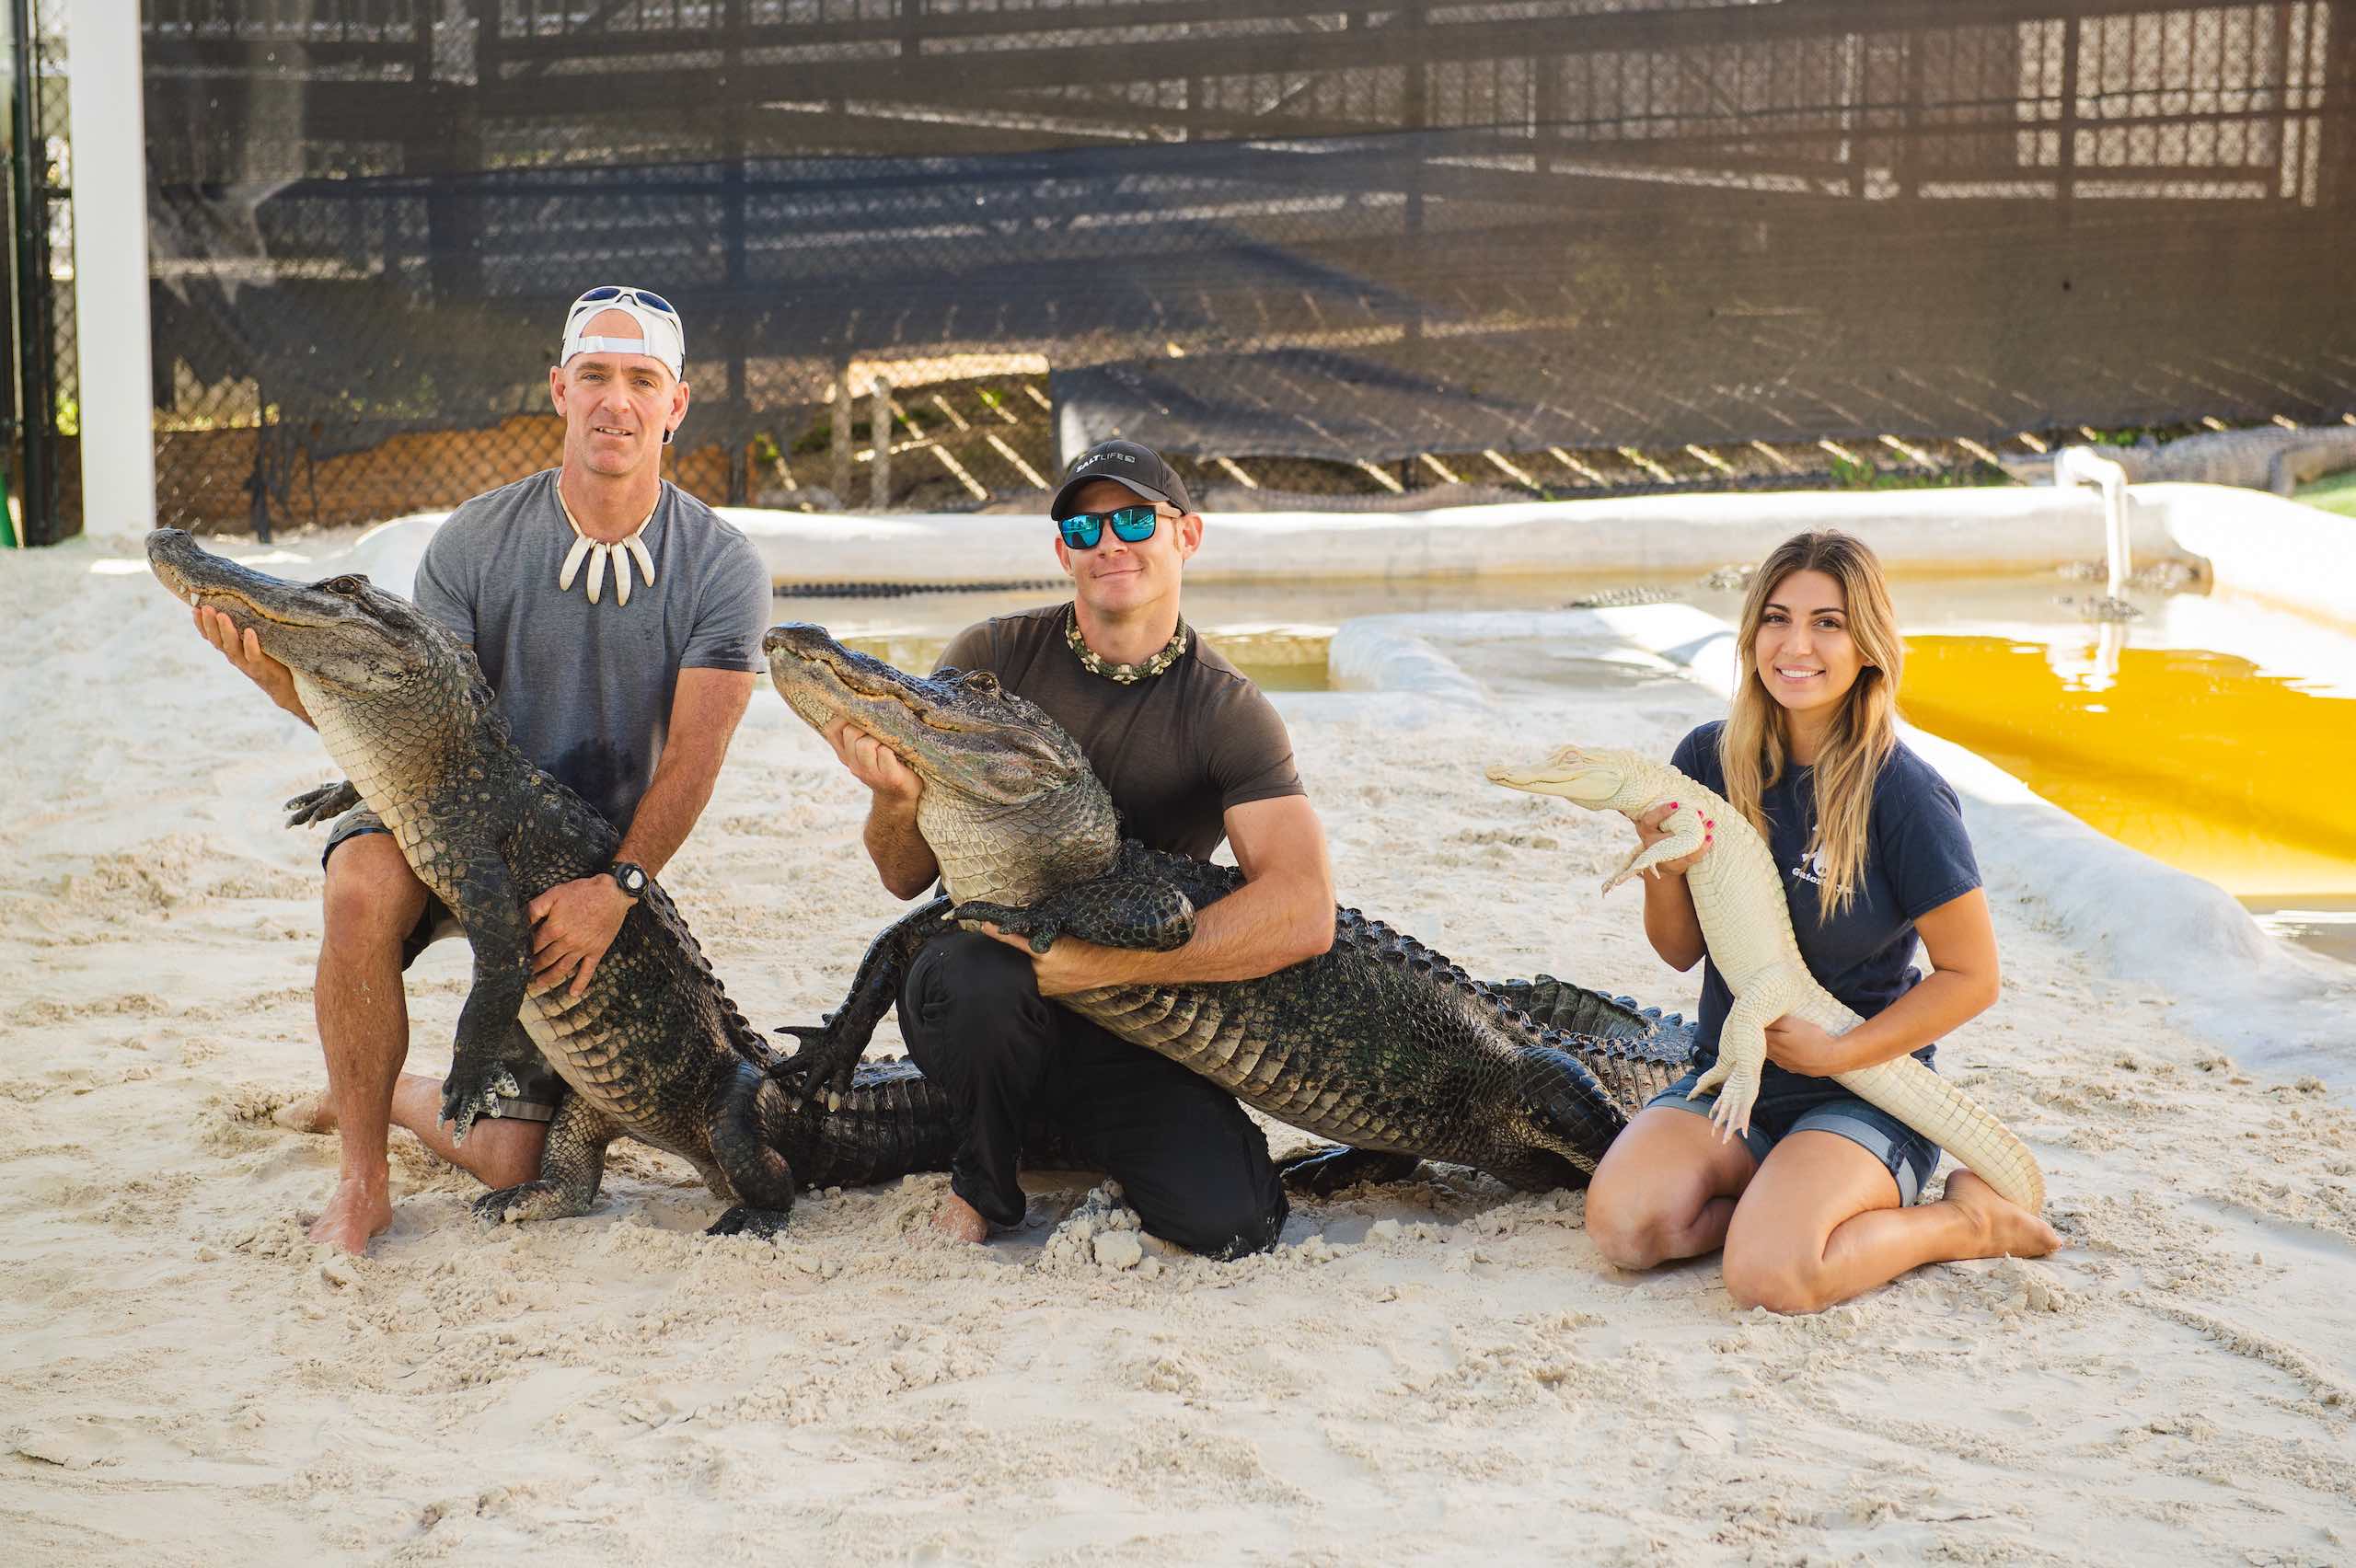 Everglades Holiday Park Two men posing with alligators along with woman posing with an albino alligator posing in a sand pit